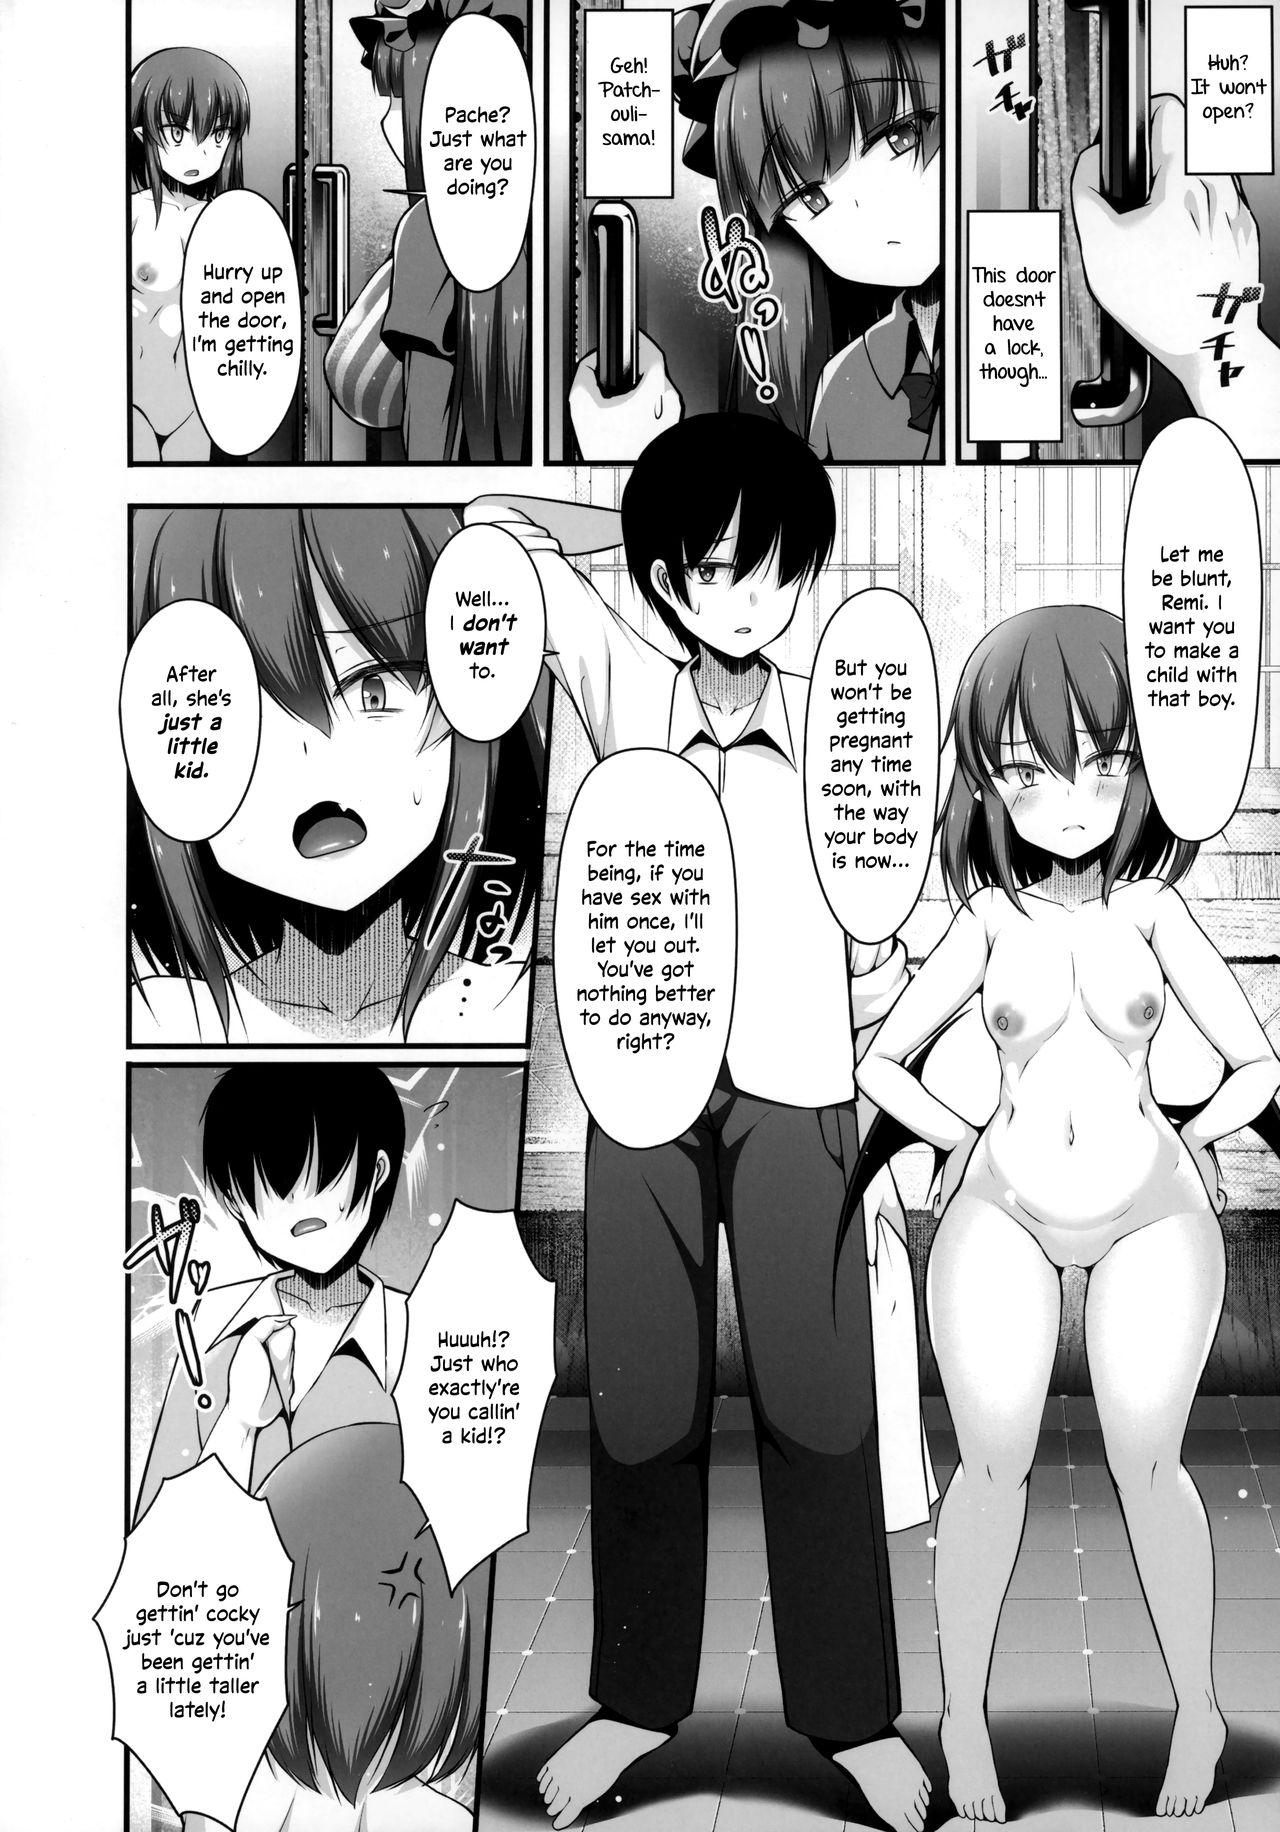 Hot Naked Girl Remilia Ojou-sama to Sex Suru made Deranai Heya | A Room Which You Can't Leave Until You Have Sex With Lady Remilia - Touhou project Fucks - Page 5